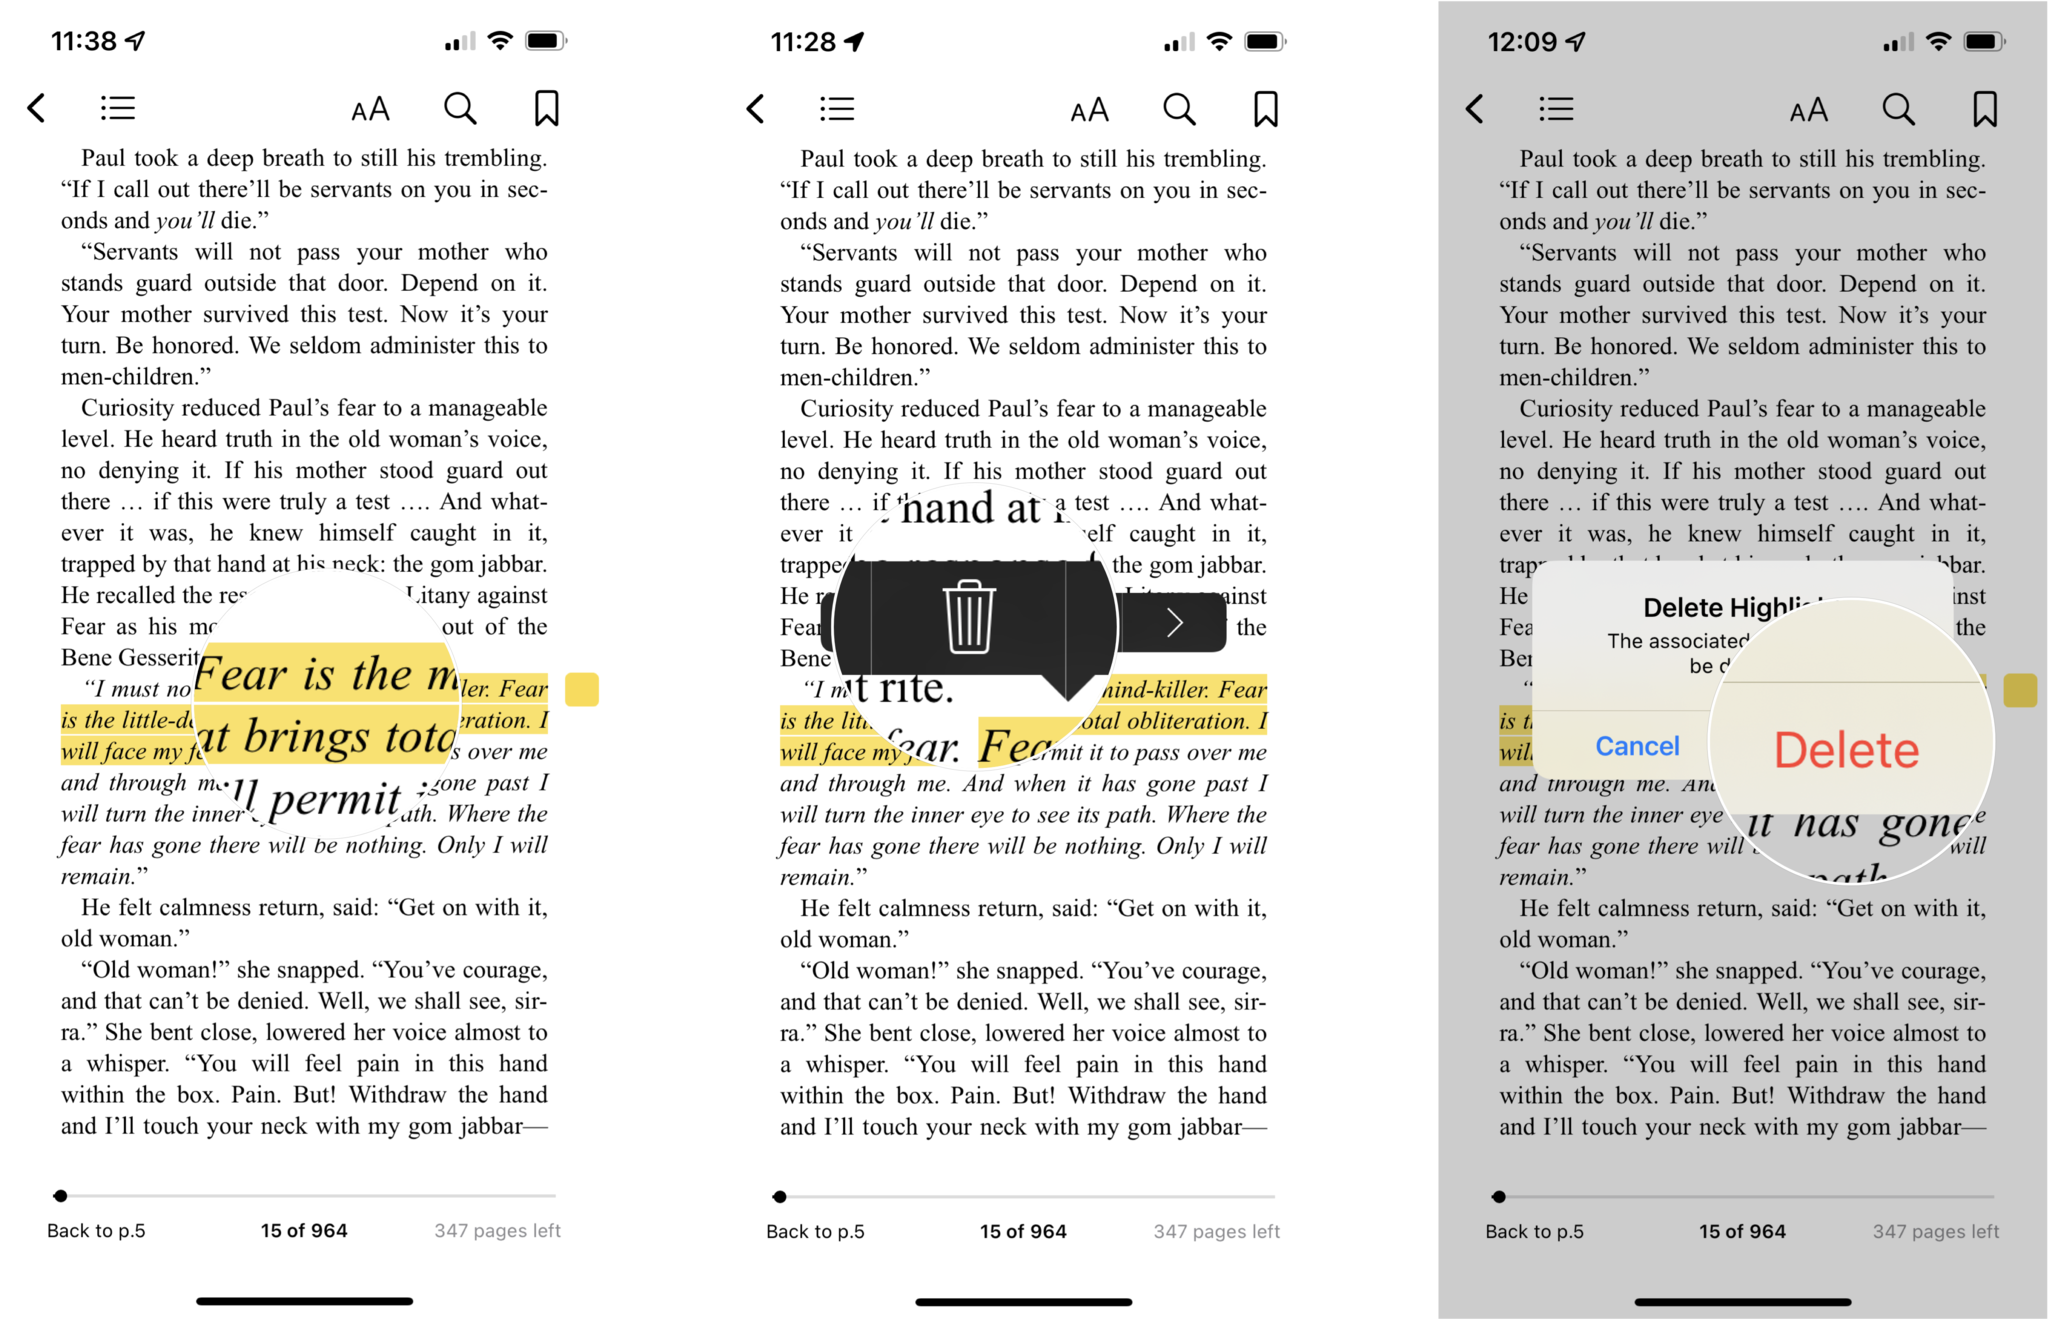 How to remove notes from a book in Apple Books: Tap the highlighted text, tap the trash icon, tap Delete